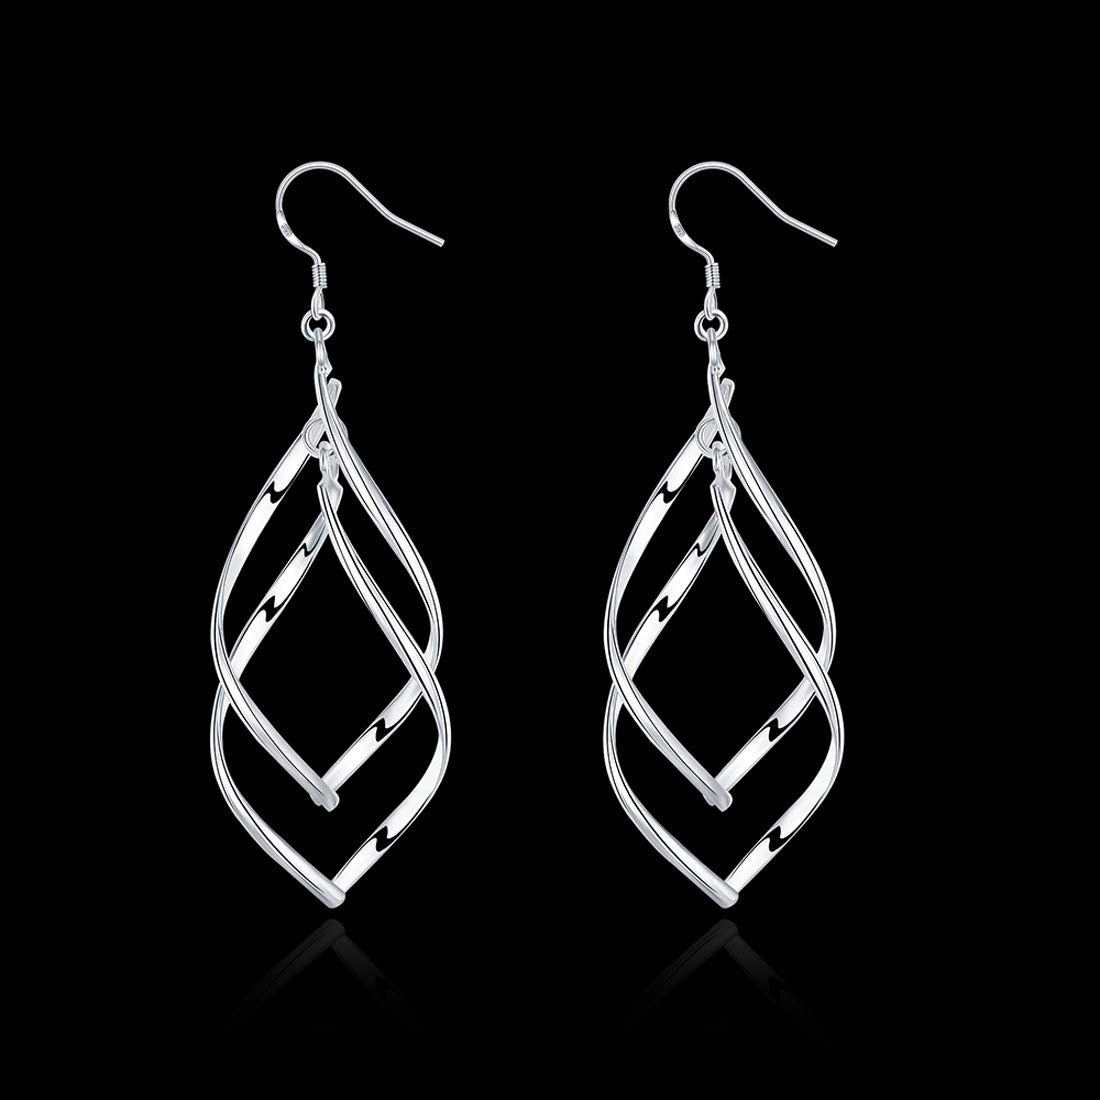 Yellow Chimes Drop Earrings for Women Silver Plated Leaf Shaped Drop Earring for Women and Girls